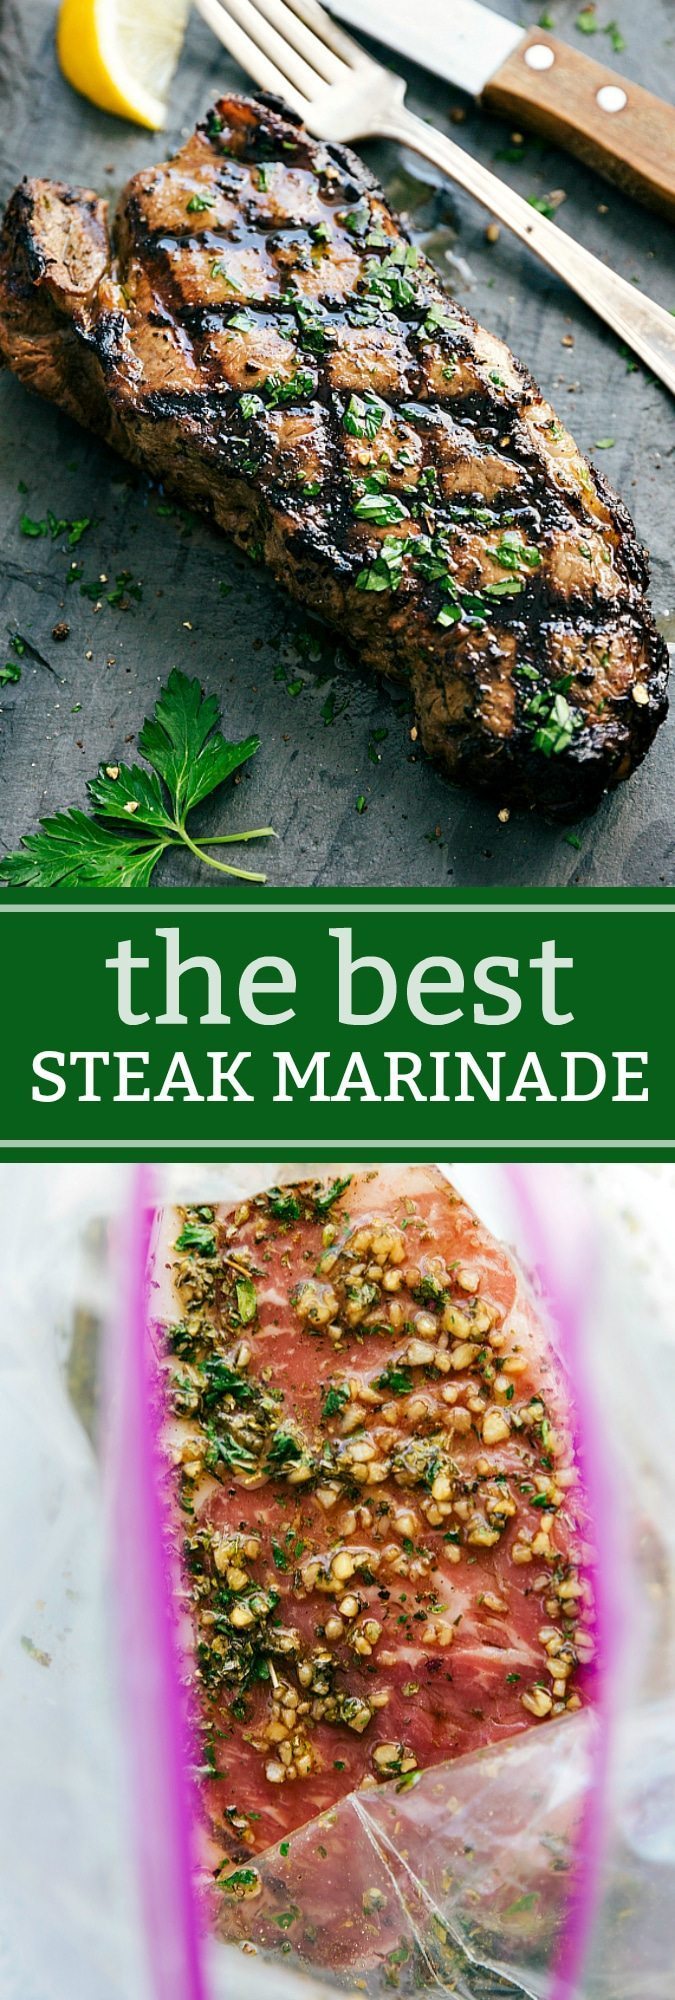 The BEST EVER Grilled Steak Marinade plus tips for grilling the best steak ever! I via chelseasmessyapron.com #steak #marinade #grill #recipe #easy